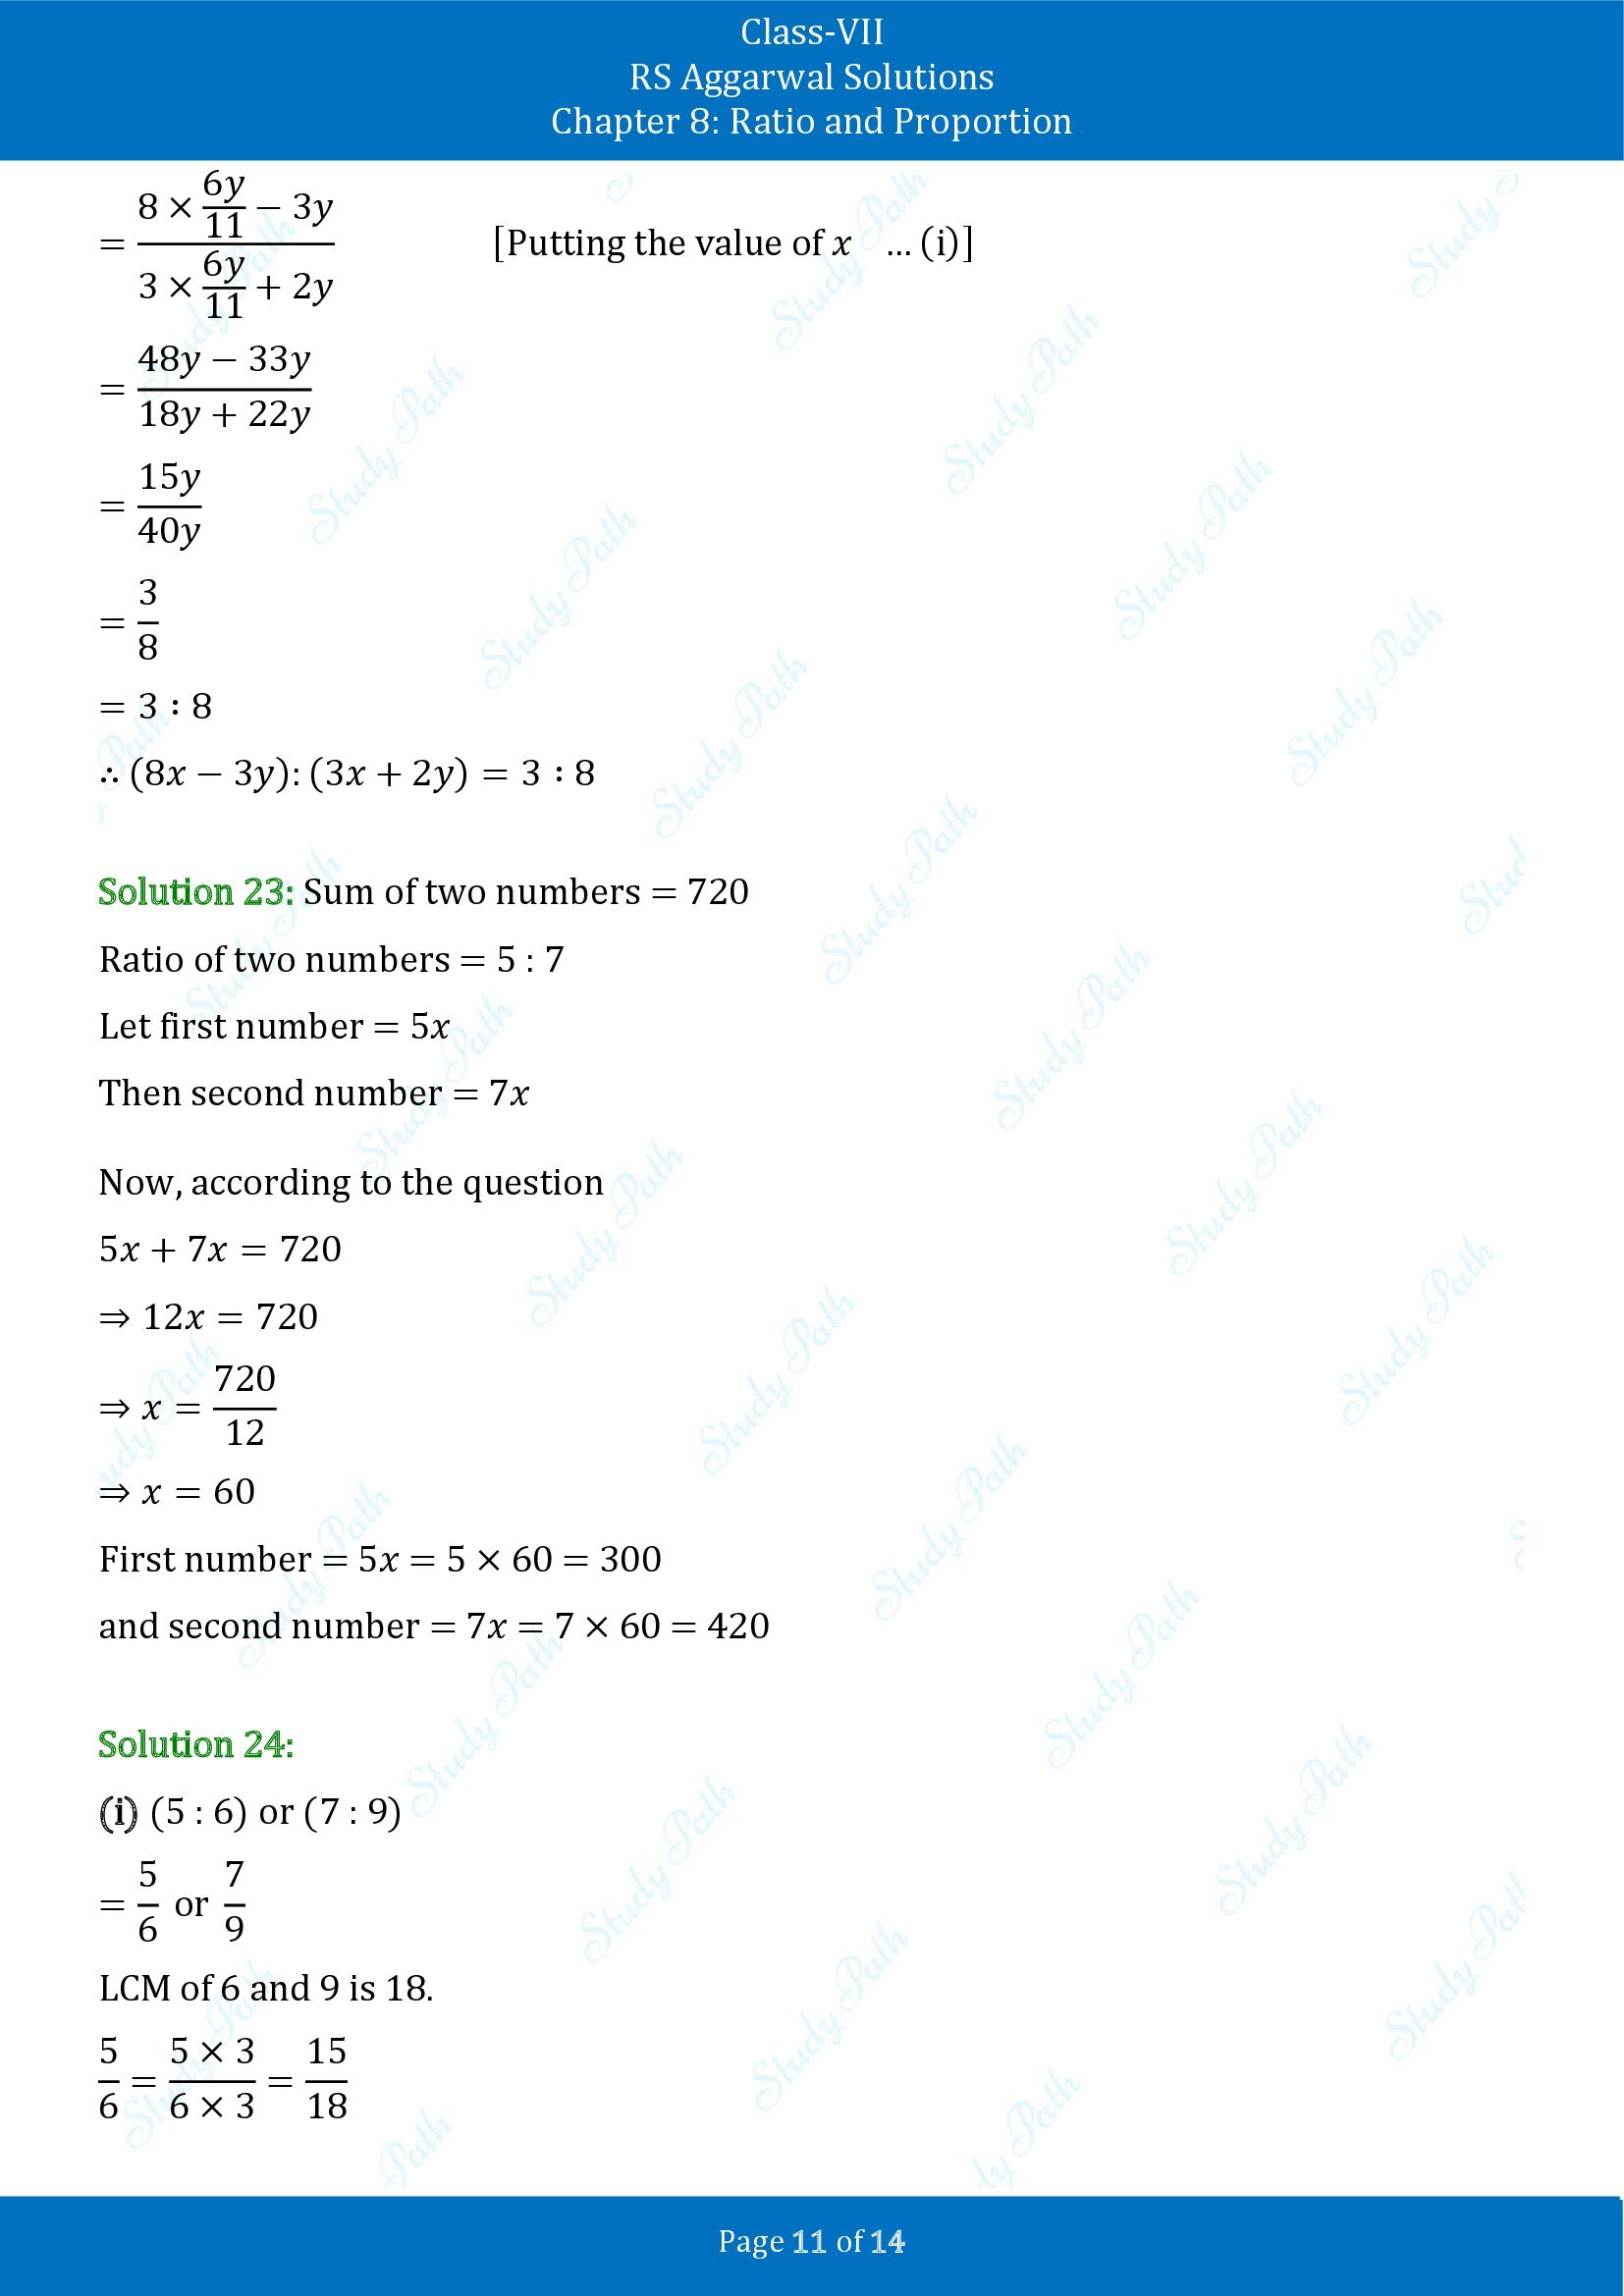 RS Aggarwal Solutions Class 7 Chapter 8 Ratio and Proportion Exercise 8A 00011